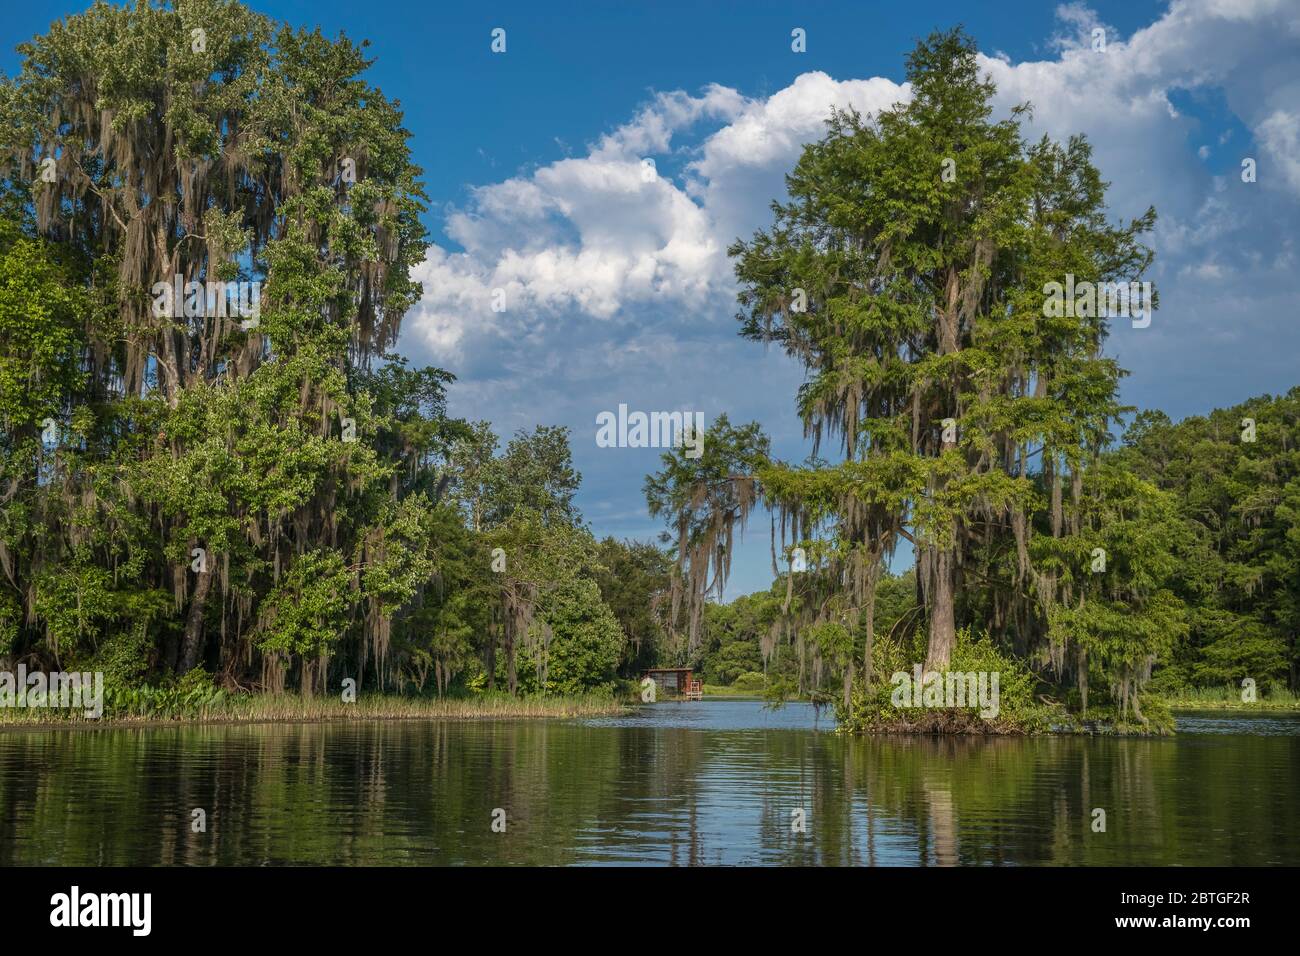 Cypress trees draped in Spanish moss along the scenicspring fed Rainbow River. Dunnellon, Florida Stock Photo